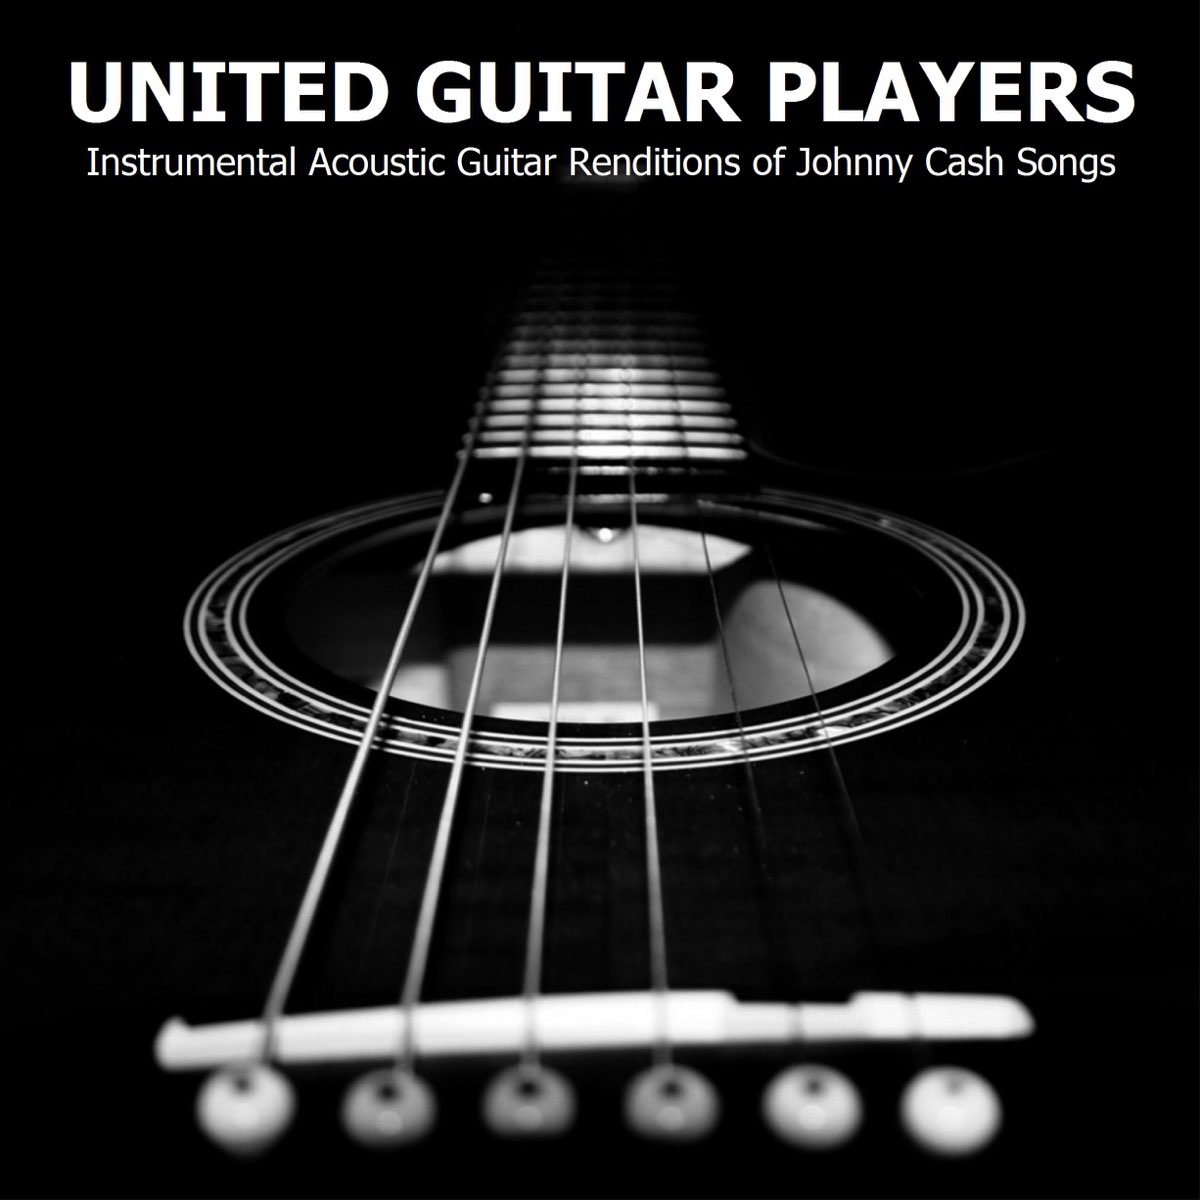 Instrumental Acoustic Guitar Renditions of Johnny Cash Songs by United  Guitar Players on Apple Music